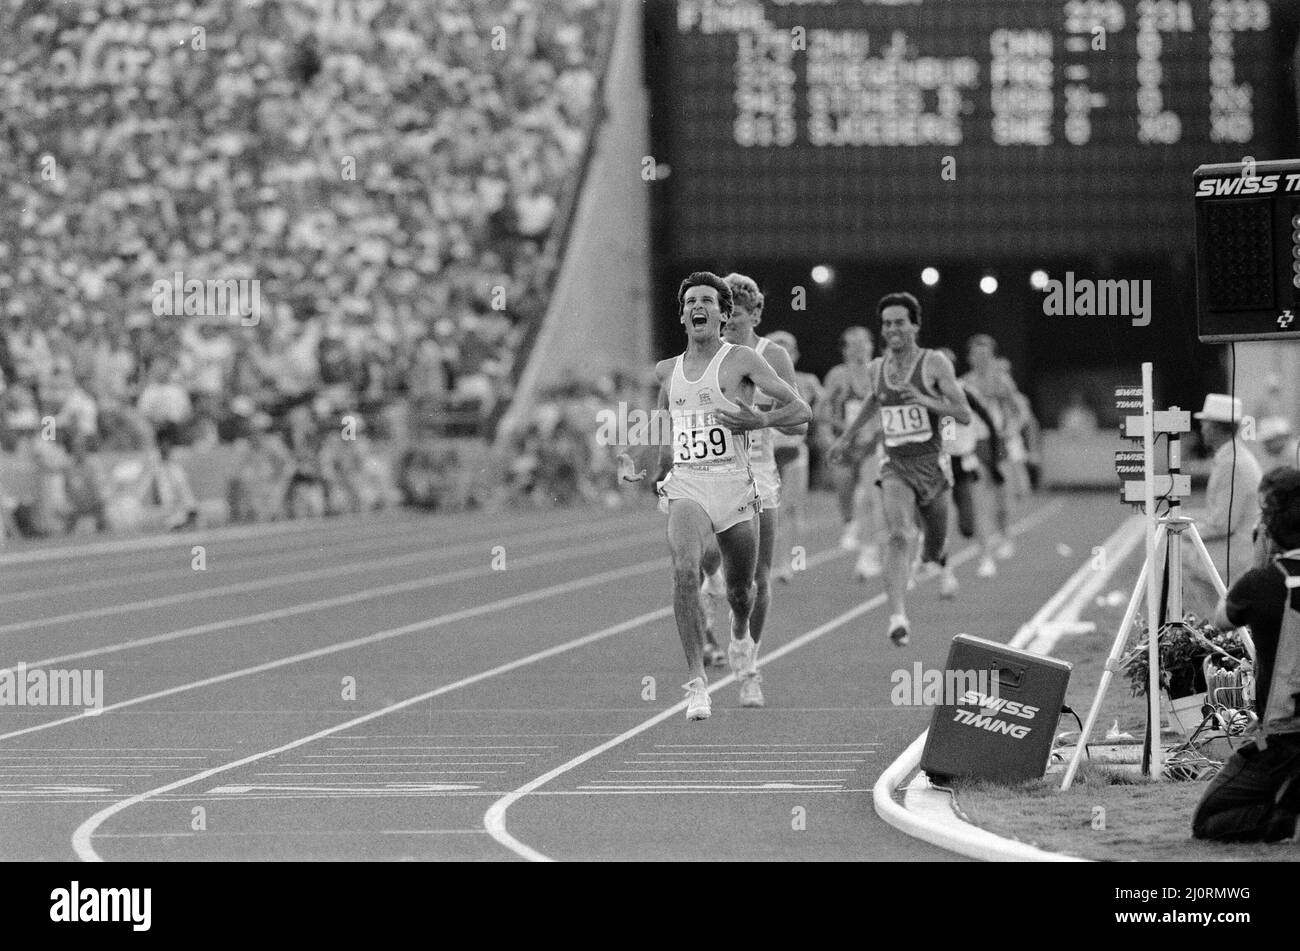 1984 Olympic Games in Los Angeles, USA.Mens Athletics. Great Britain's Sebastain Coe wins the 1500 metres gold medal ahead of his fellow countryman Steve Cram who took silver. 11th August 1984. Stock Photo